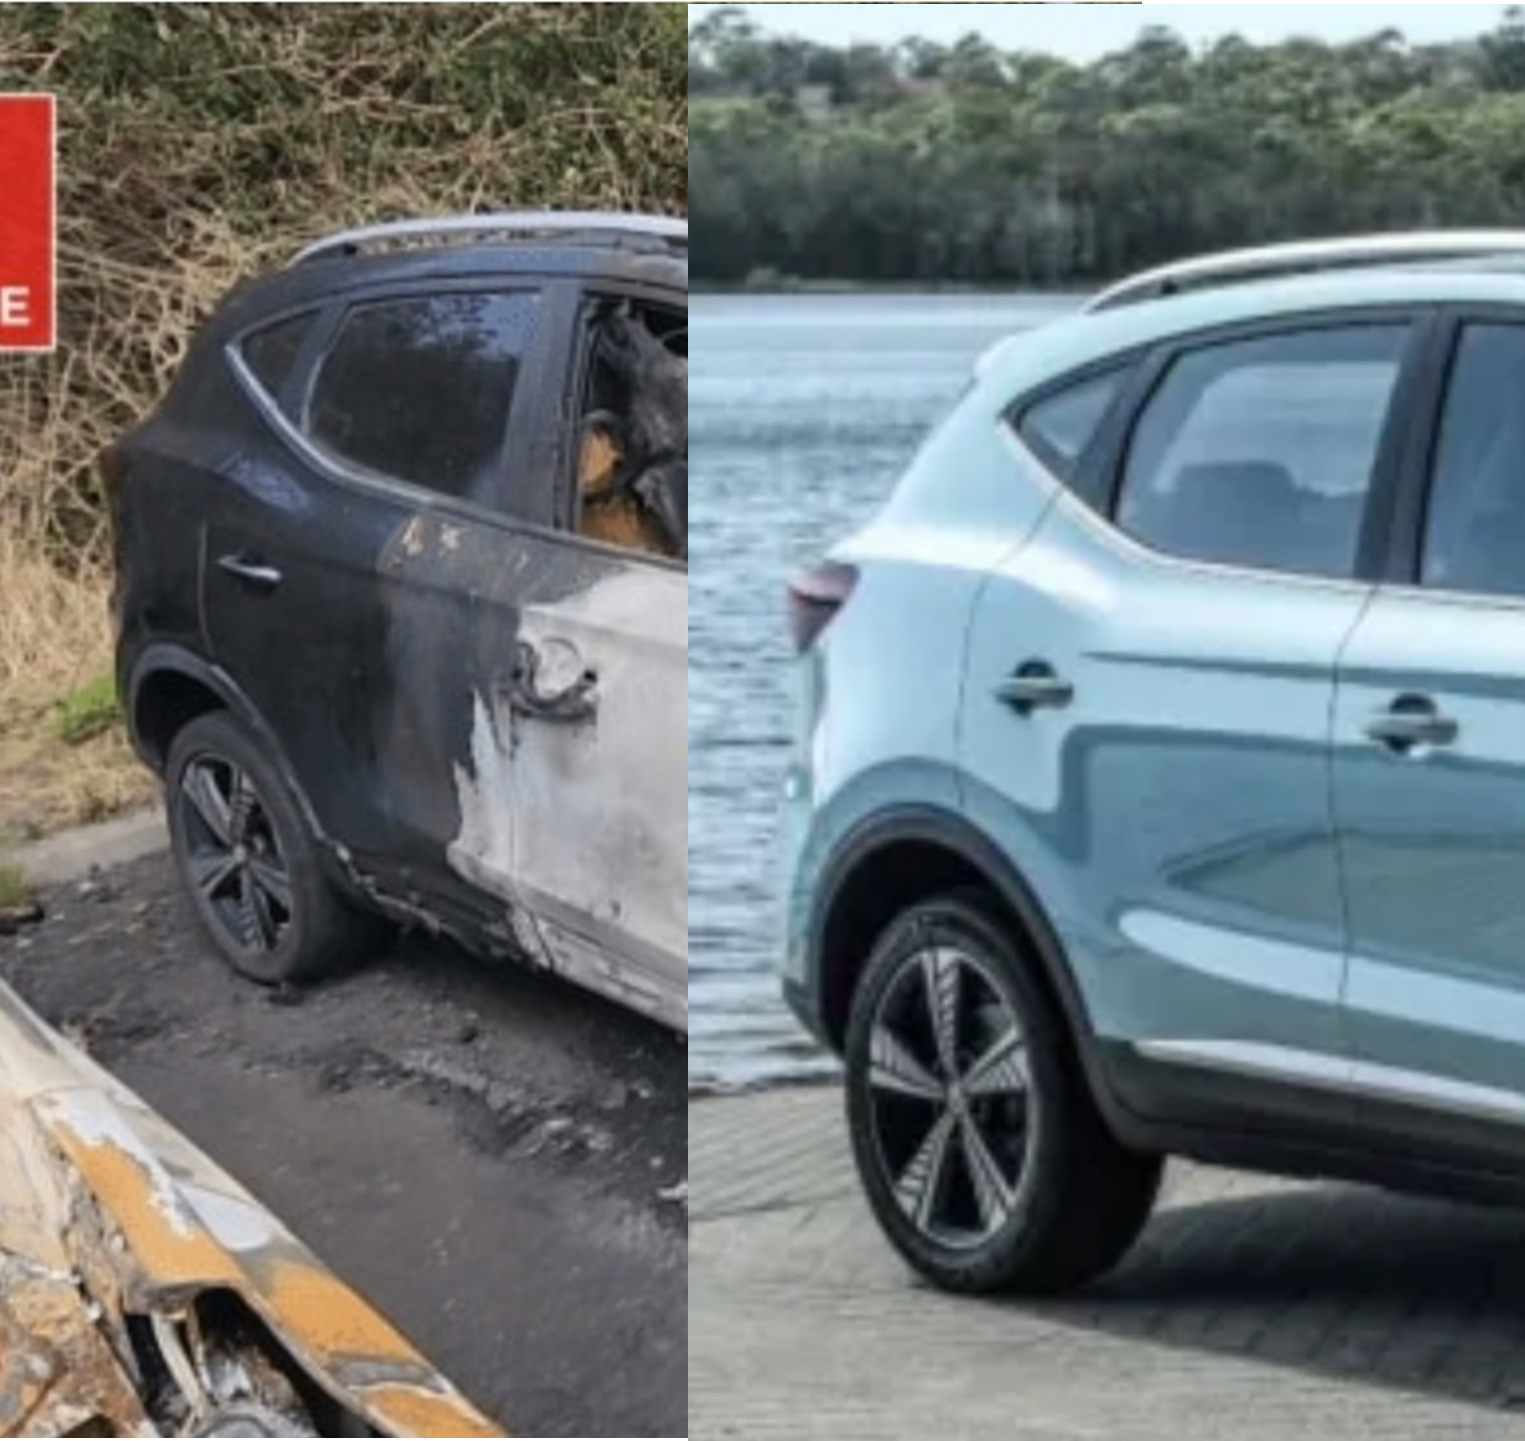 Figure 2. The burnt-out EV at Mascot Airport alongside a promo shot for an MG EV SUV